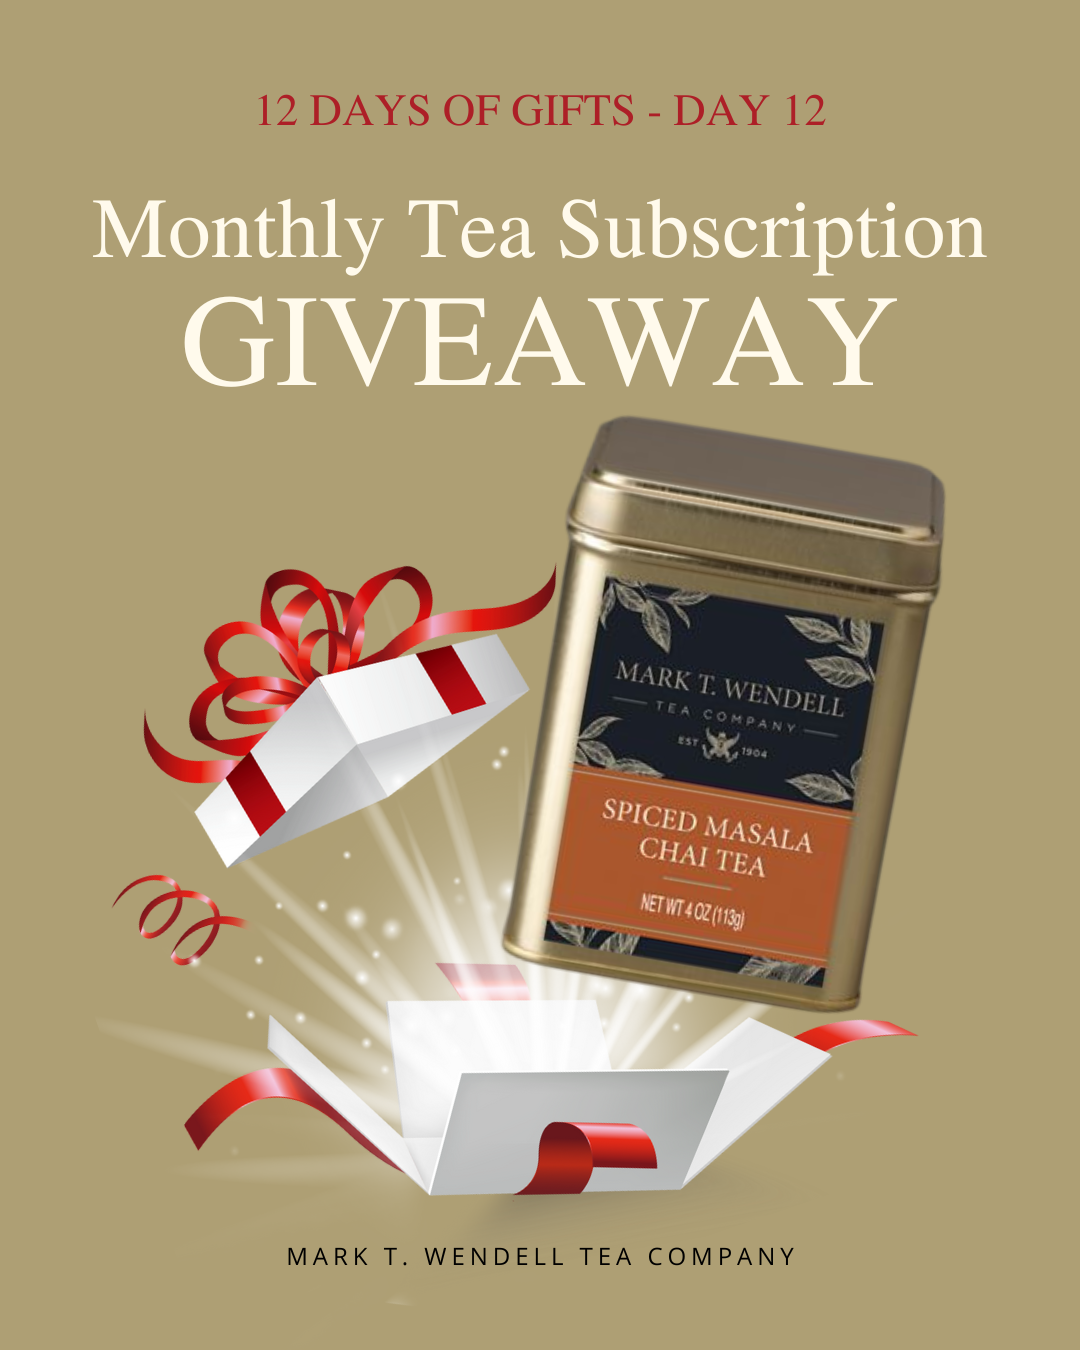 Day 12 2 month free trial tea subscription